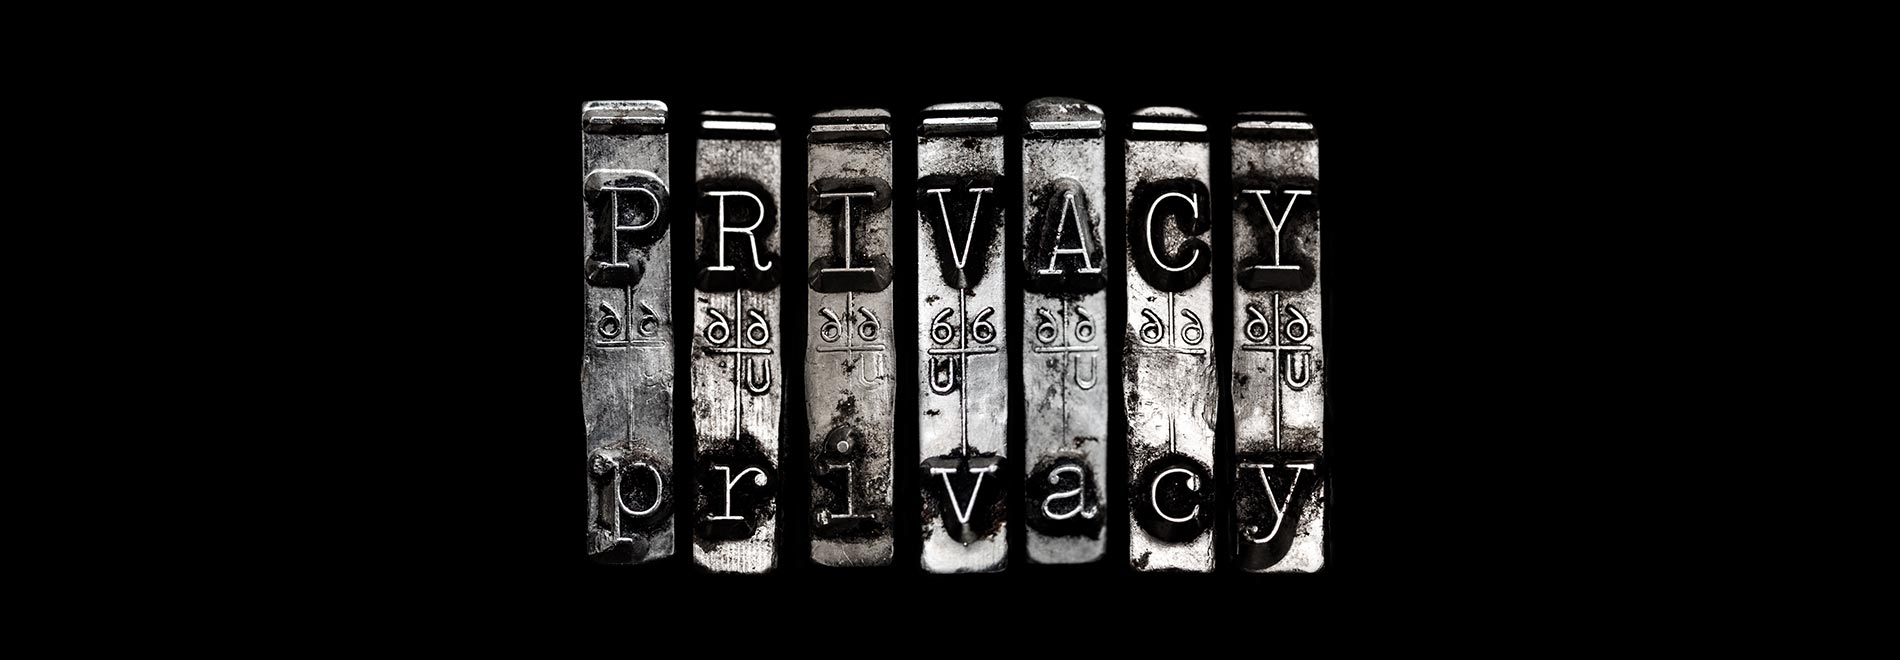 Privacy Policy | OutdoorKeeda